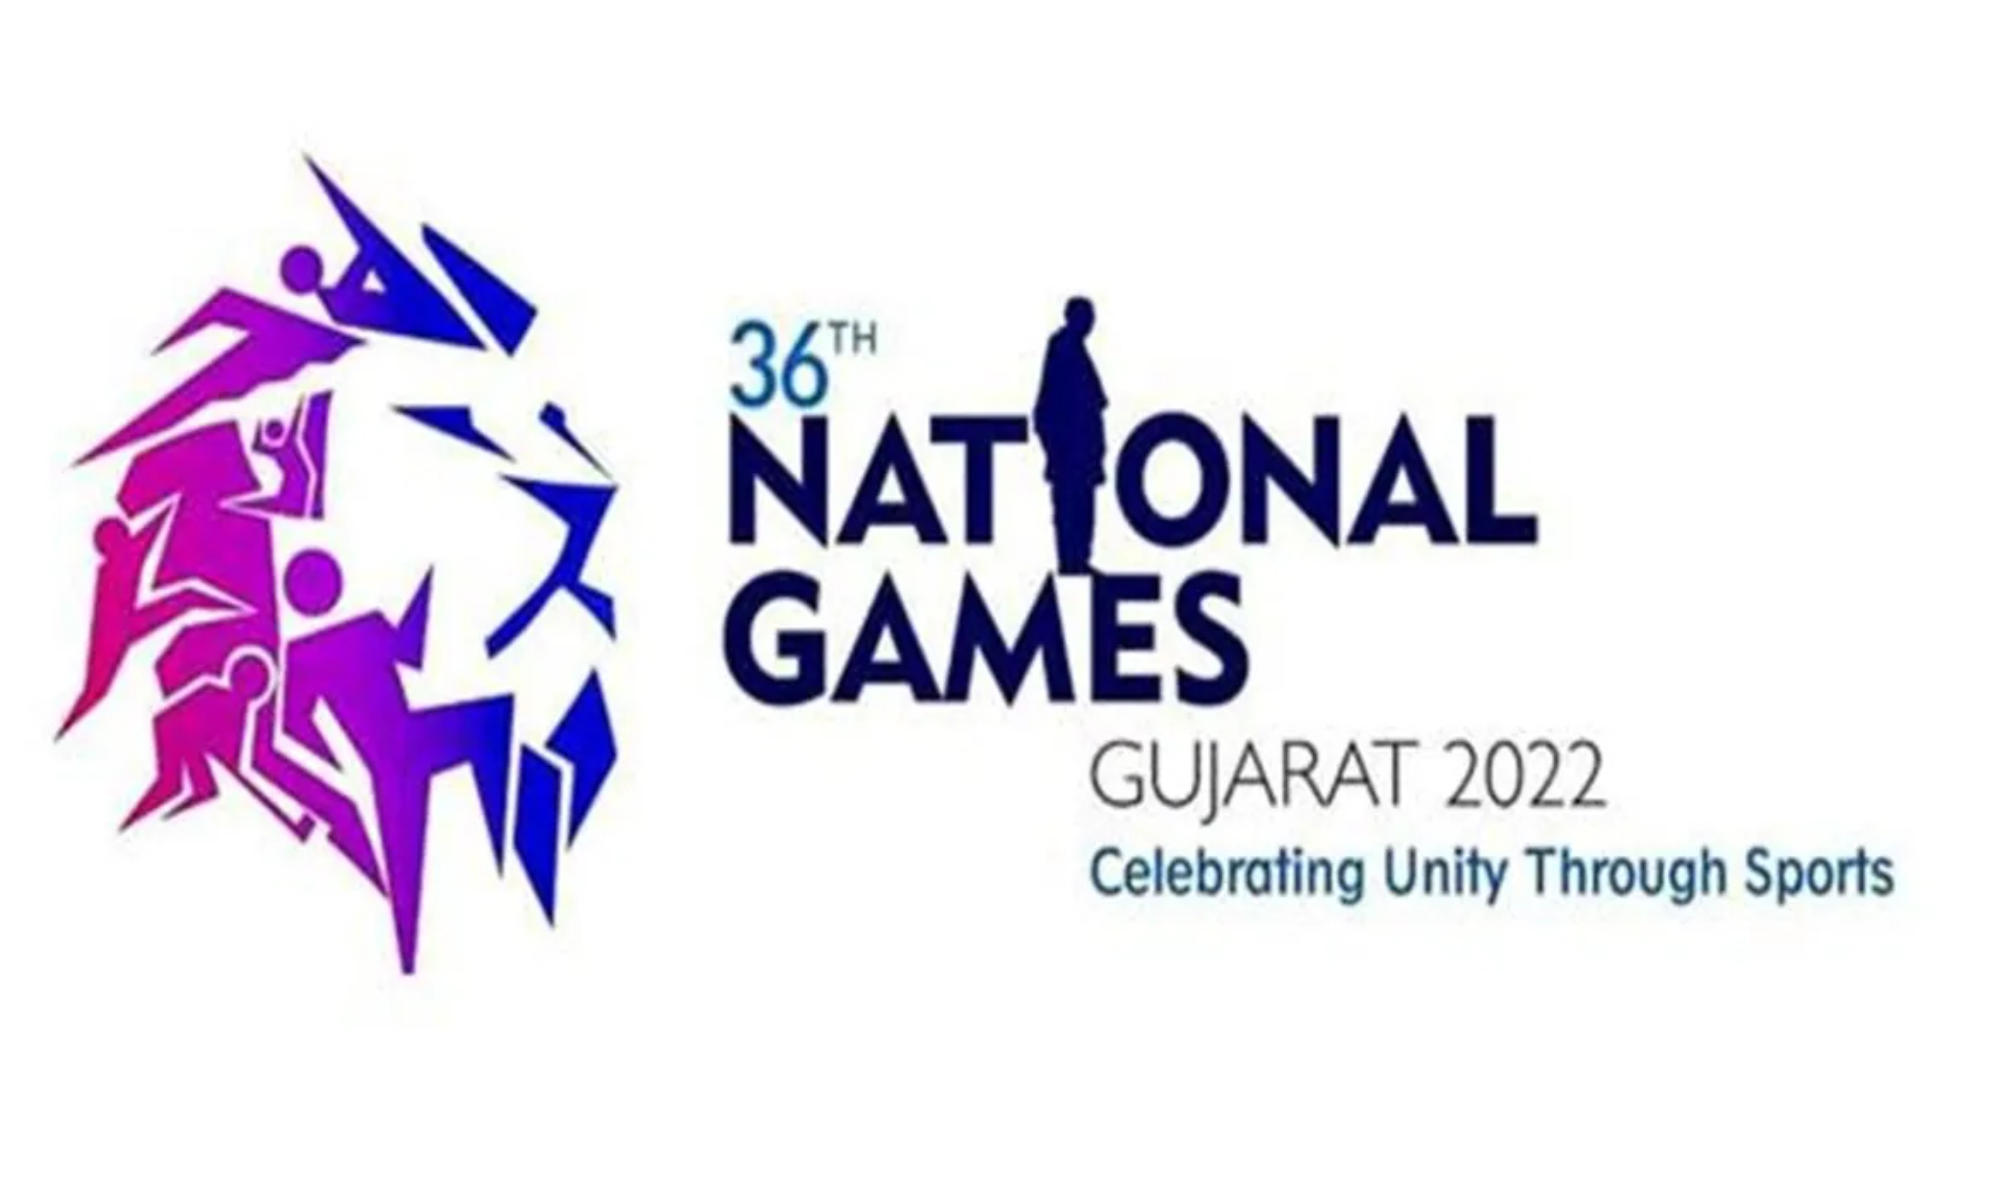 National Games 2022: Music and culture light up opening ceremony in Ahmedabad